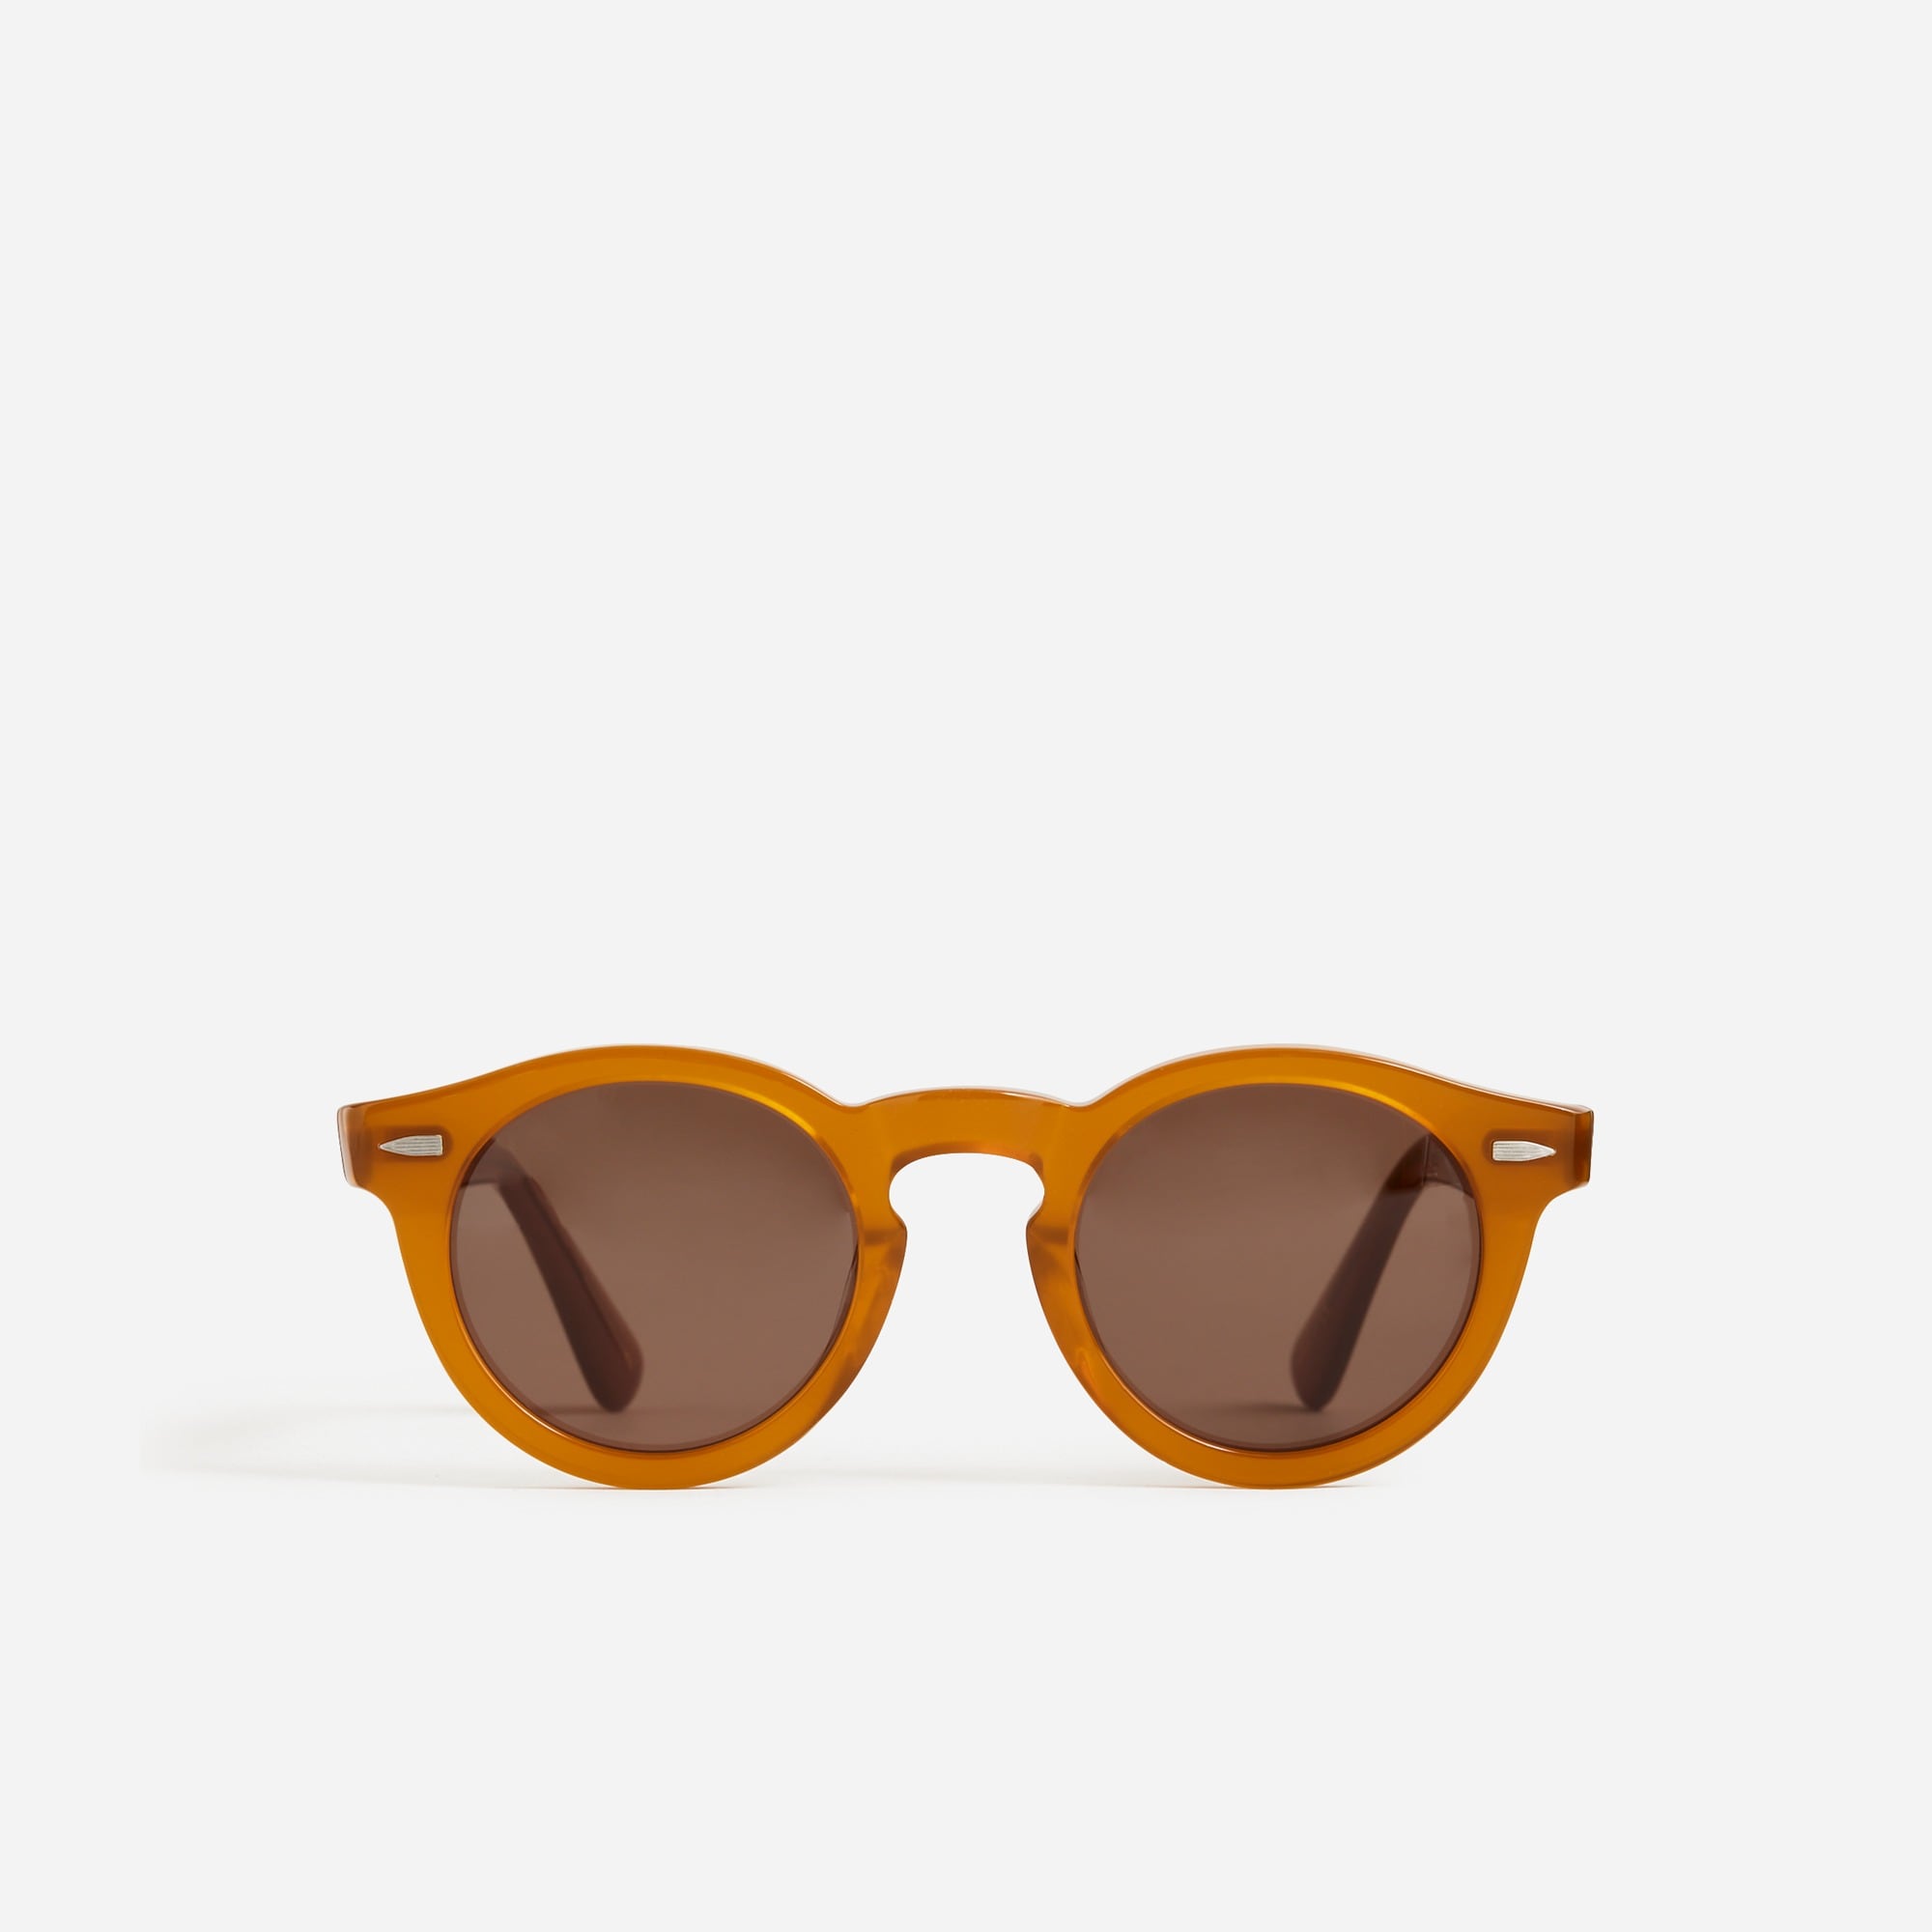 J.Crew Men's Perry Sunglasses (Size One Size)